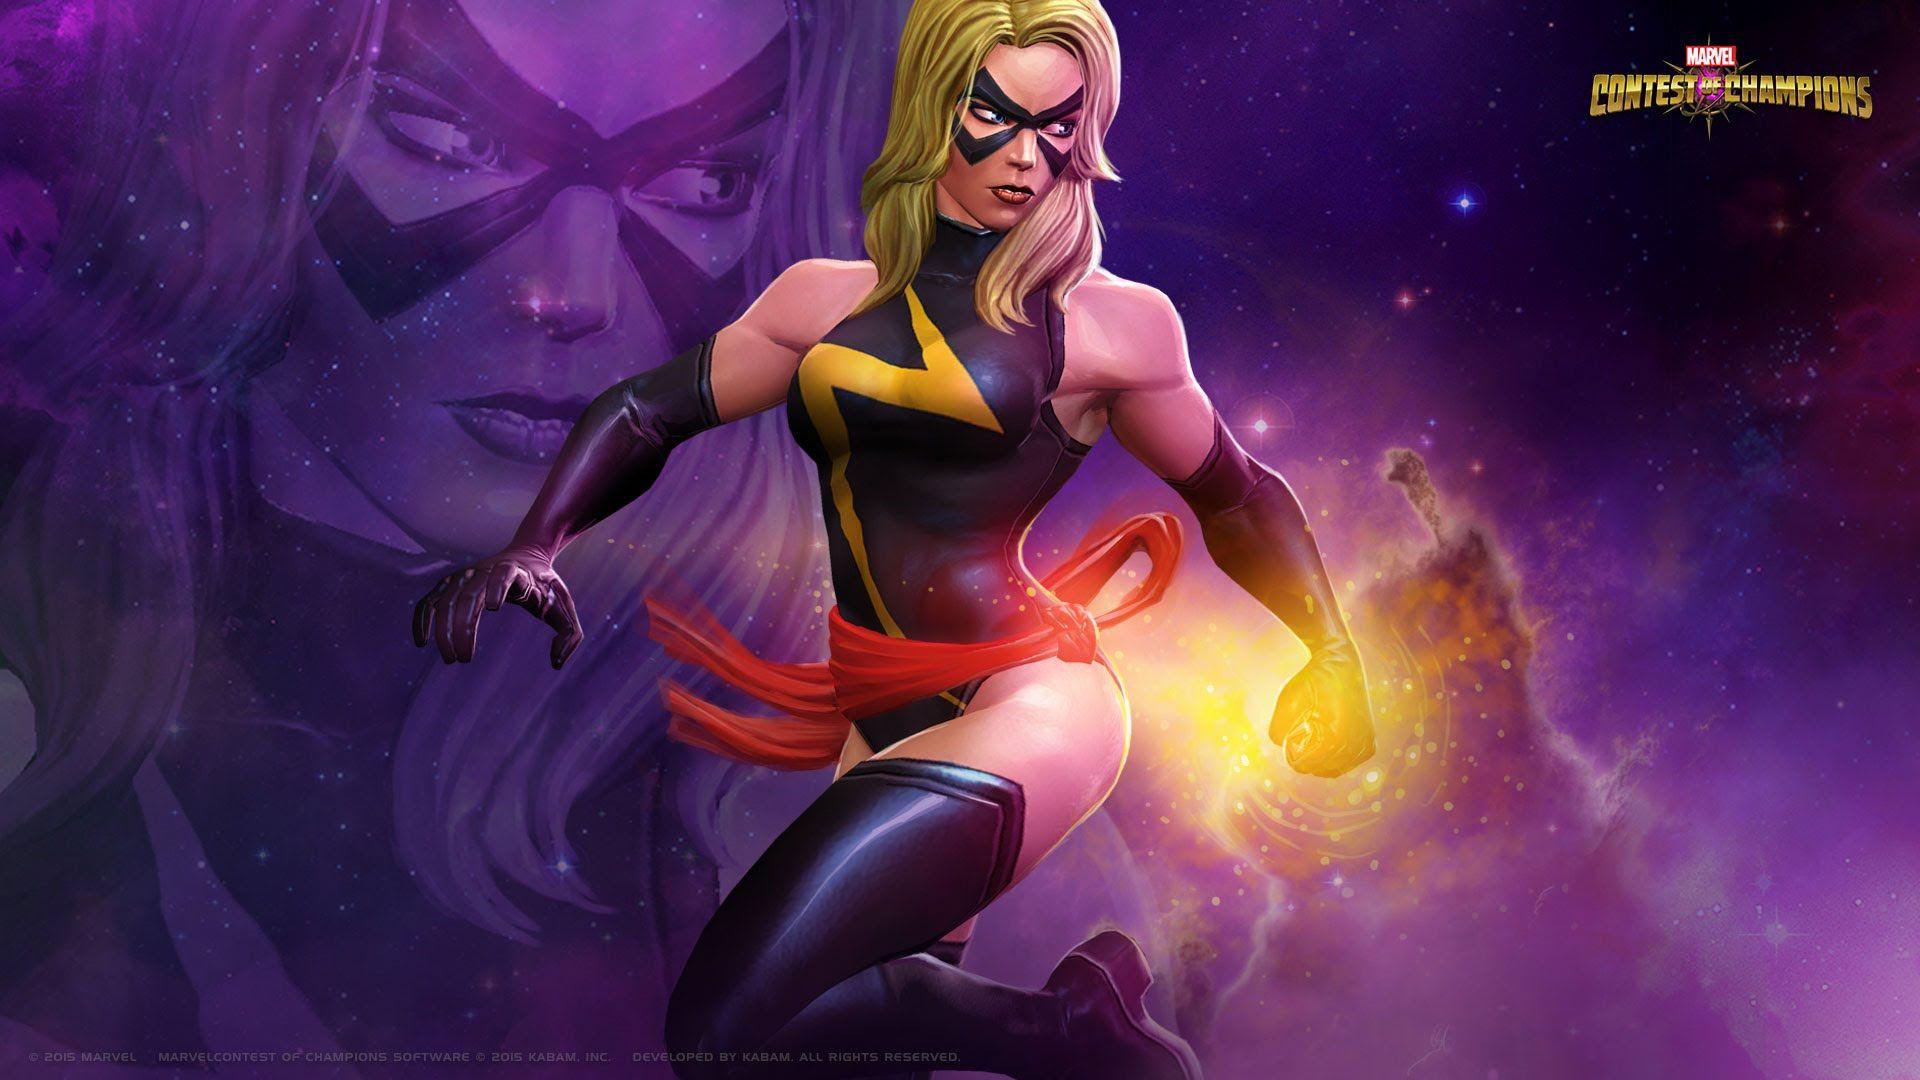 Carol Danvers Becomes Ms. Marvel in Marvel Contest of Champions